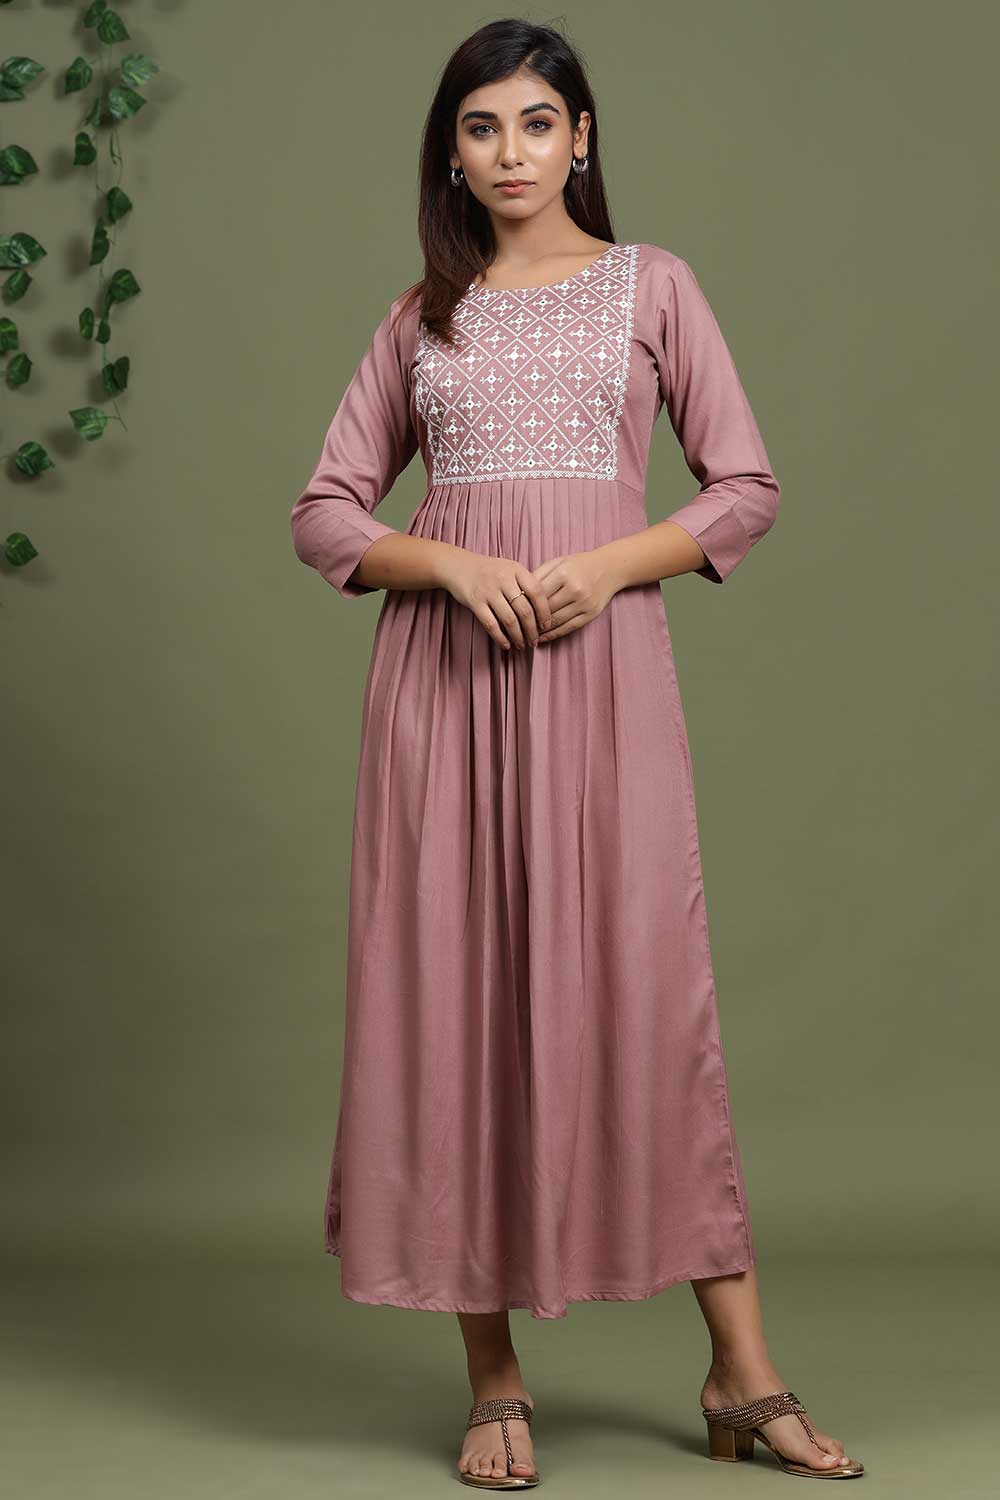 Buy Viscose Rayon Miror Embroidered Dress in Light Purple Online